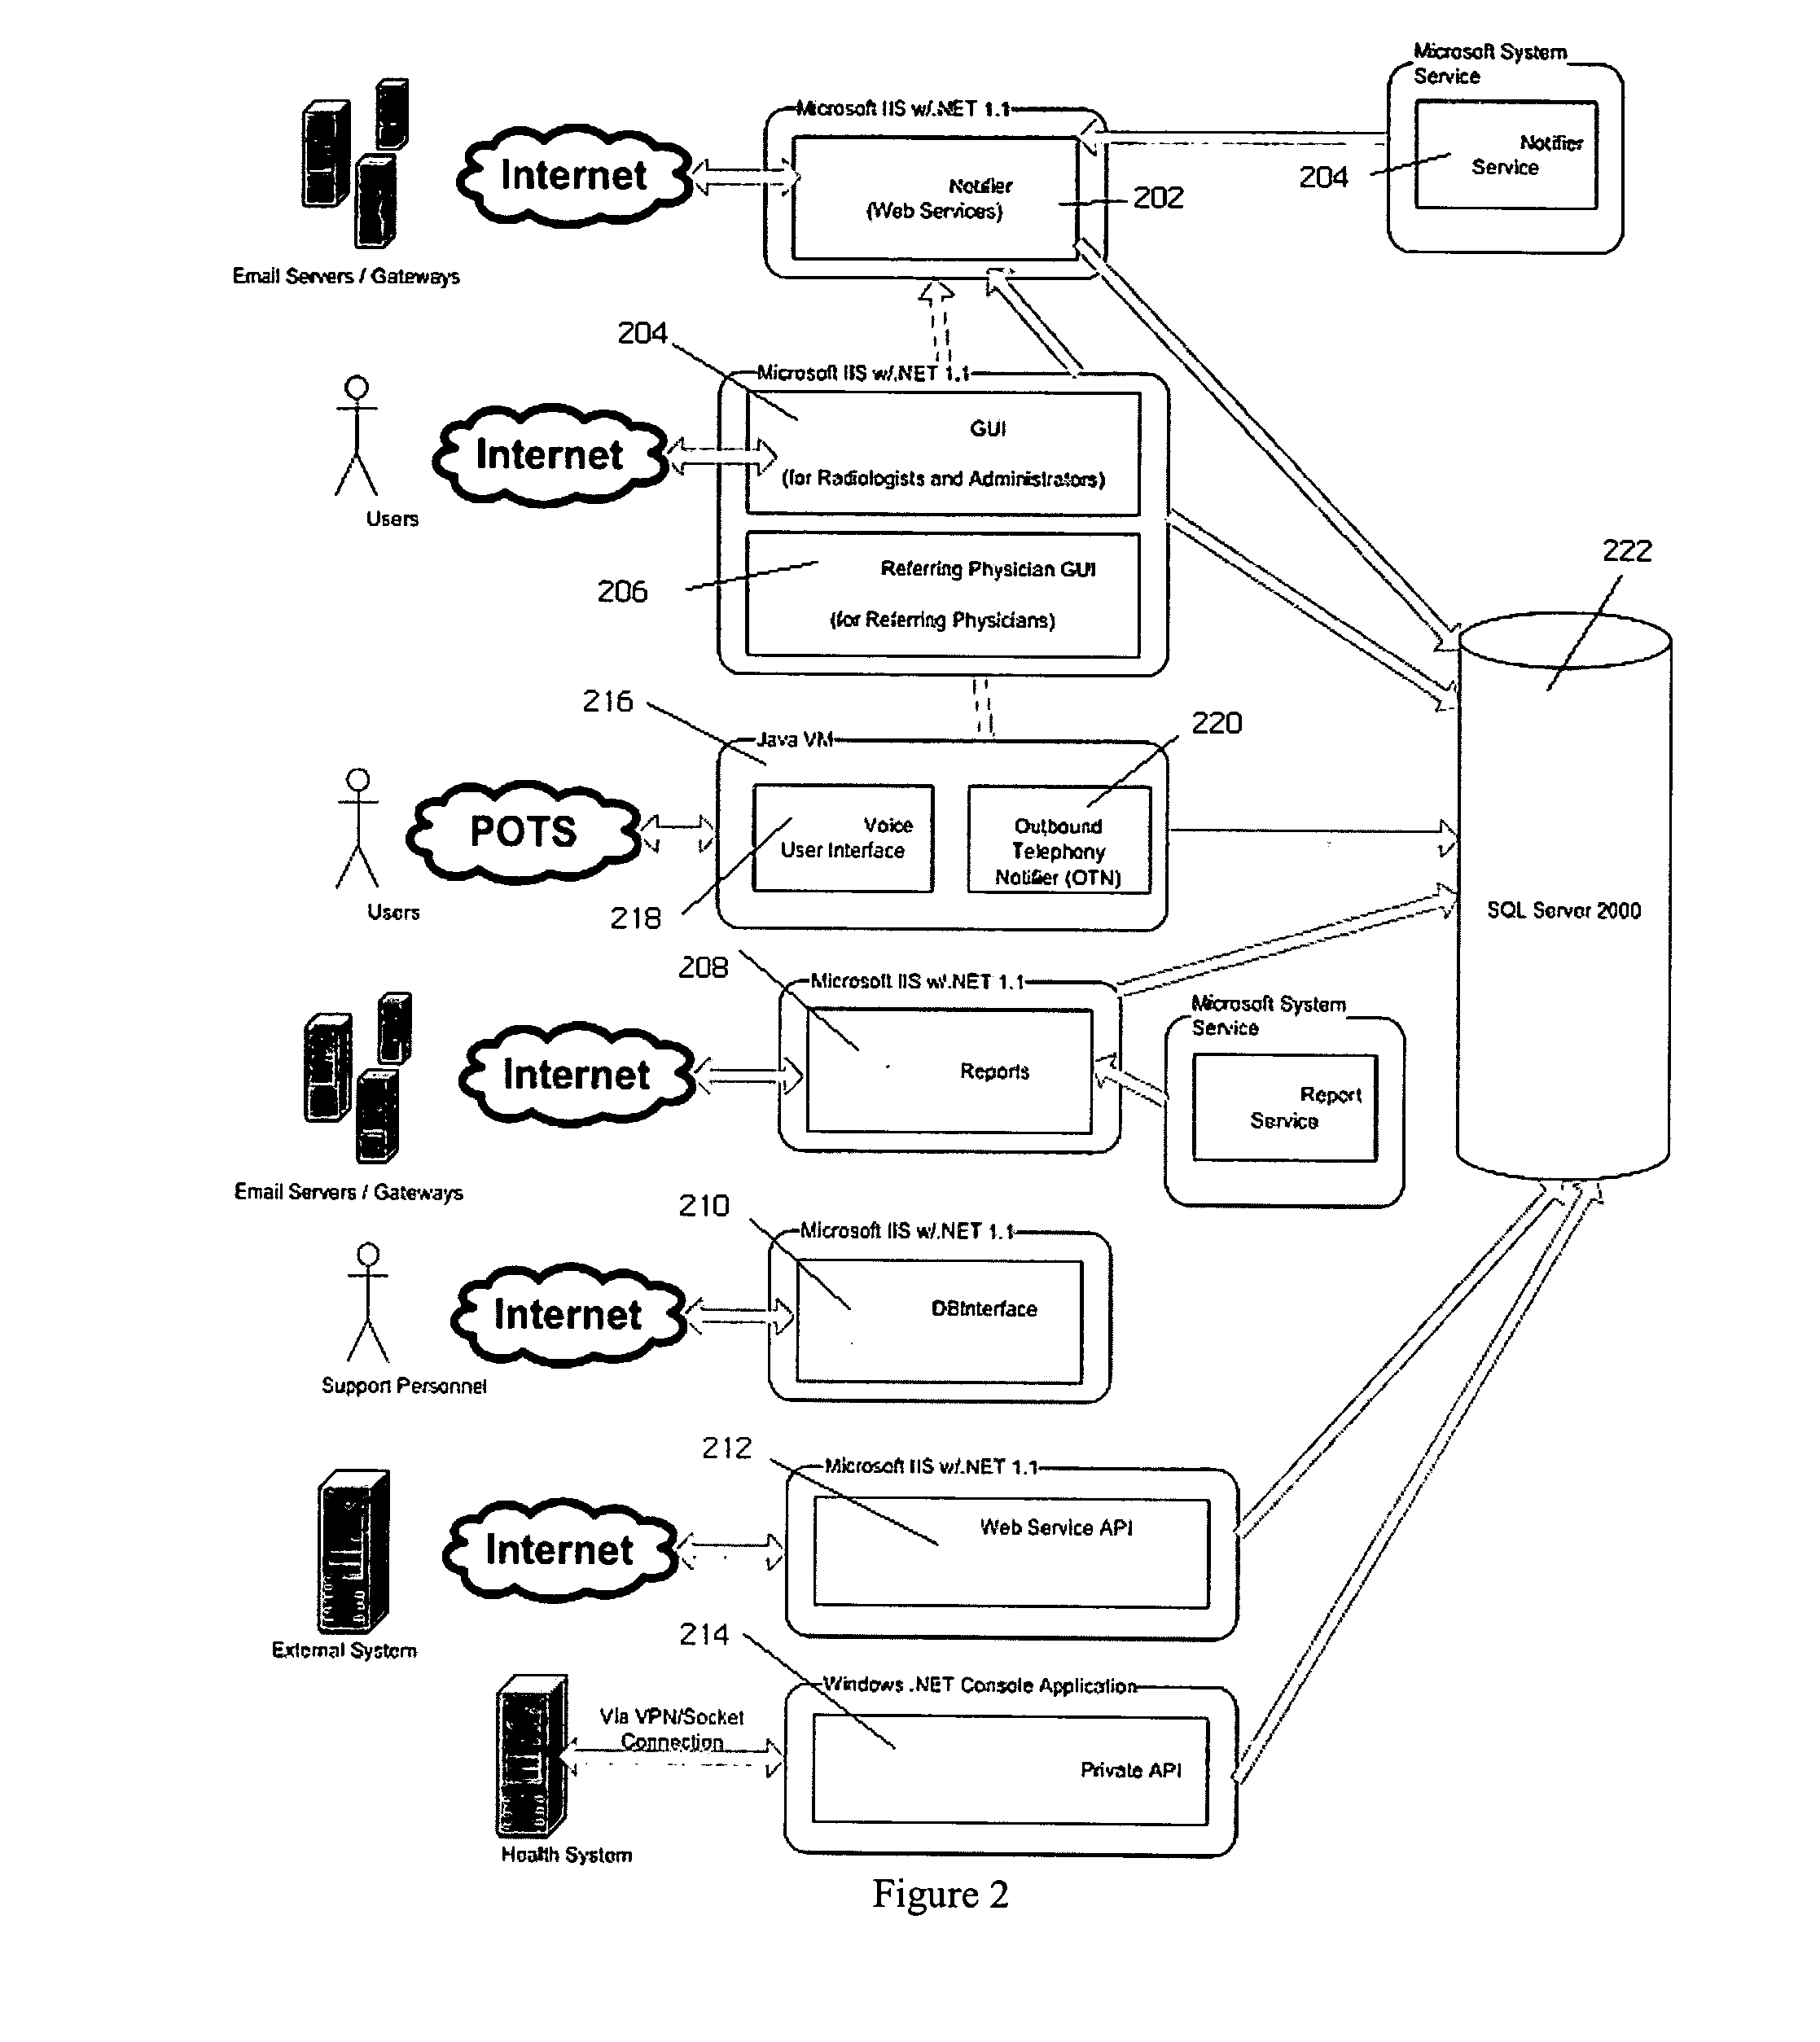 Method and system for providing storage and retrieval of clinical information